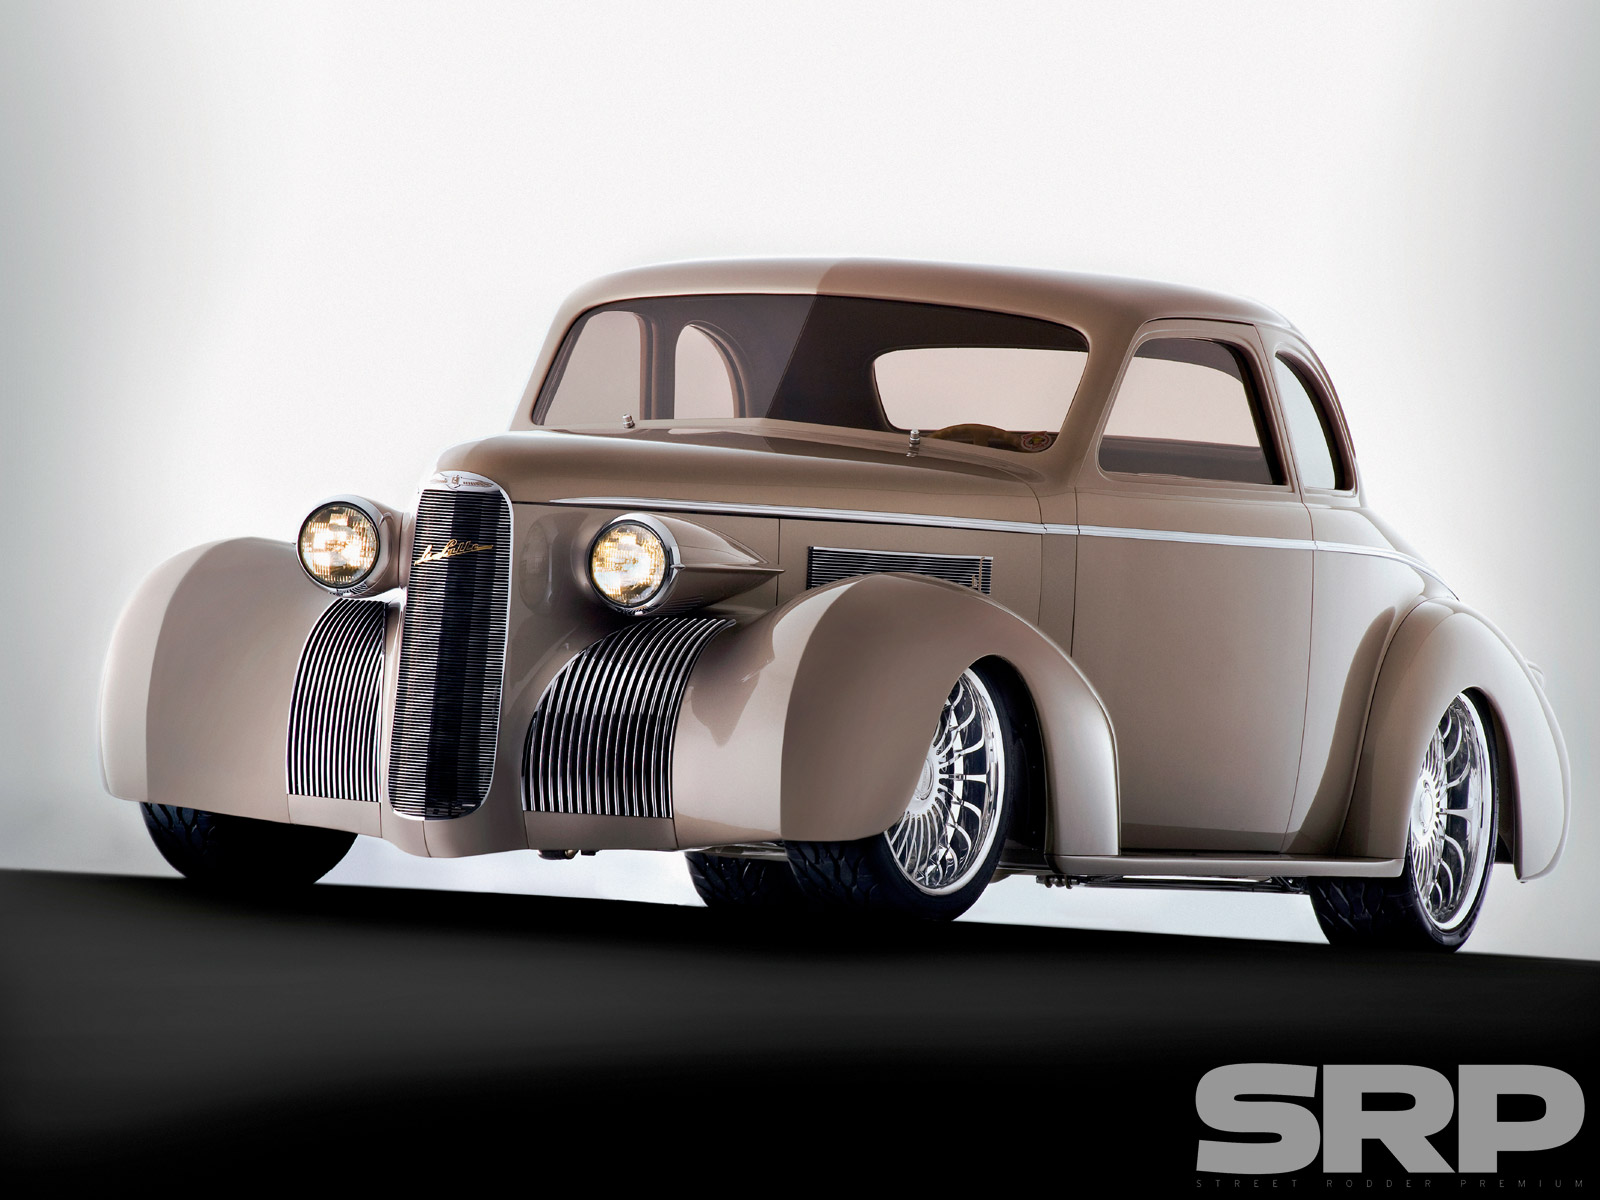 1939 Cadillac Lasalle Backgrounds on Wallpapers Vista